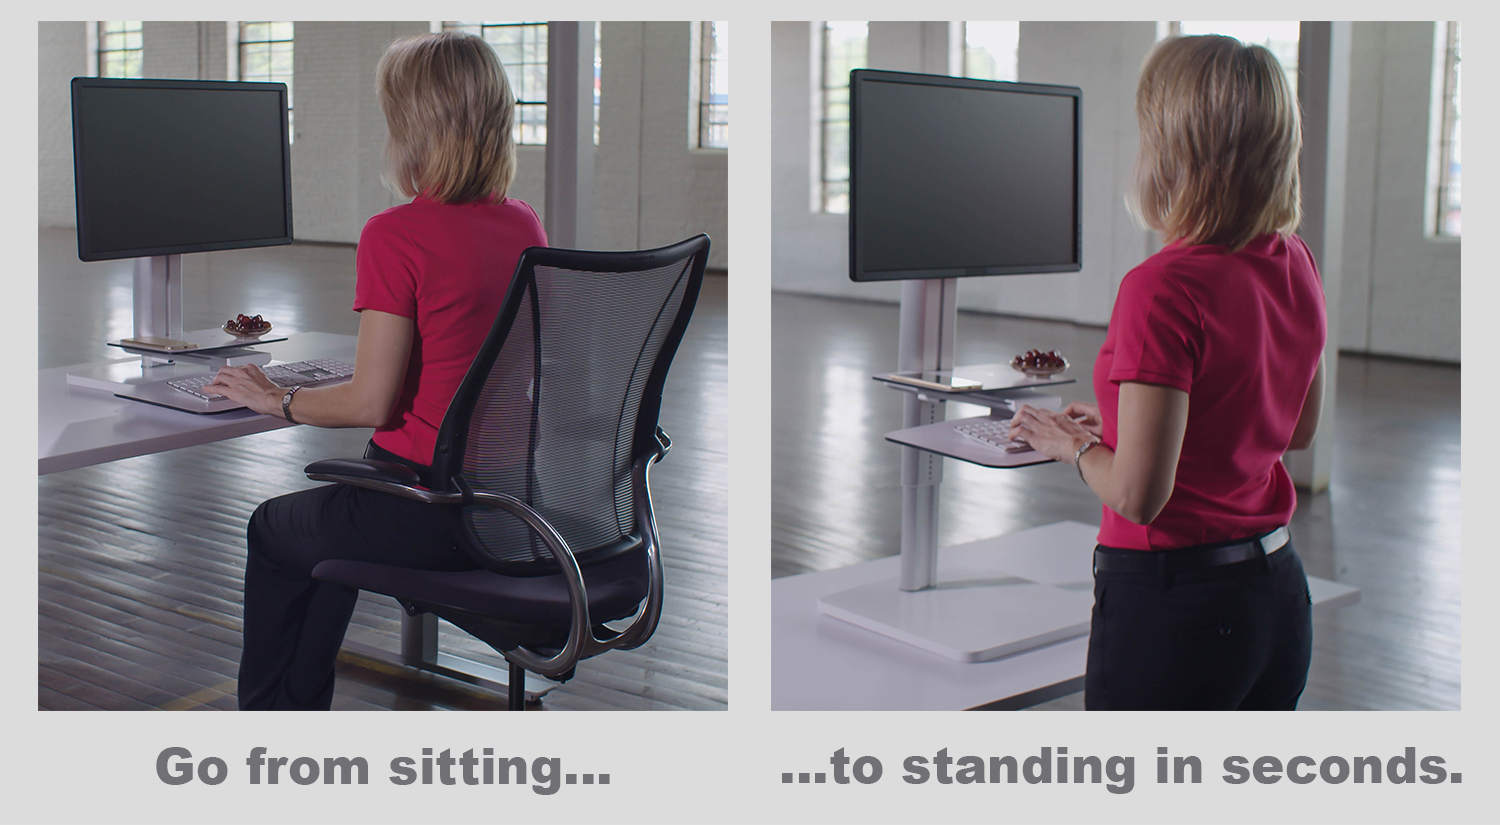 Transition from sitting to standing quickly with the Sit2Stand's adjustable column